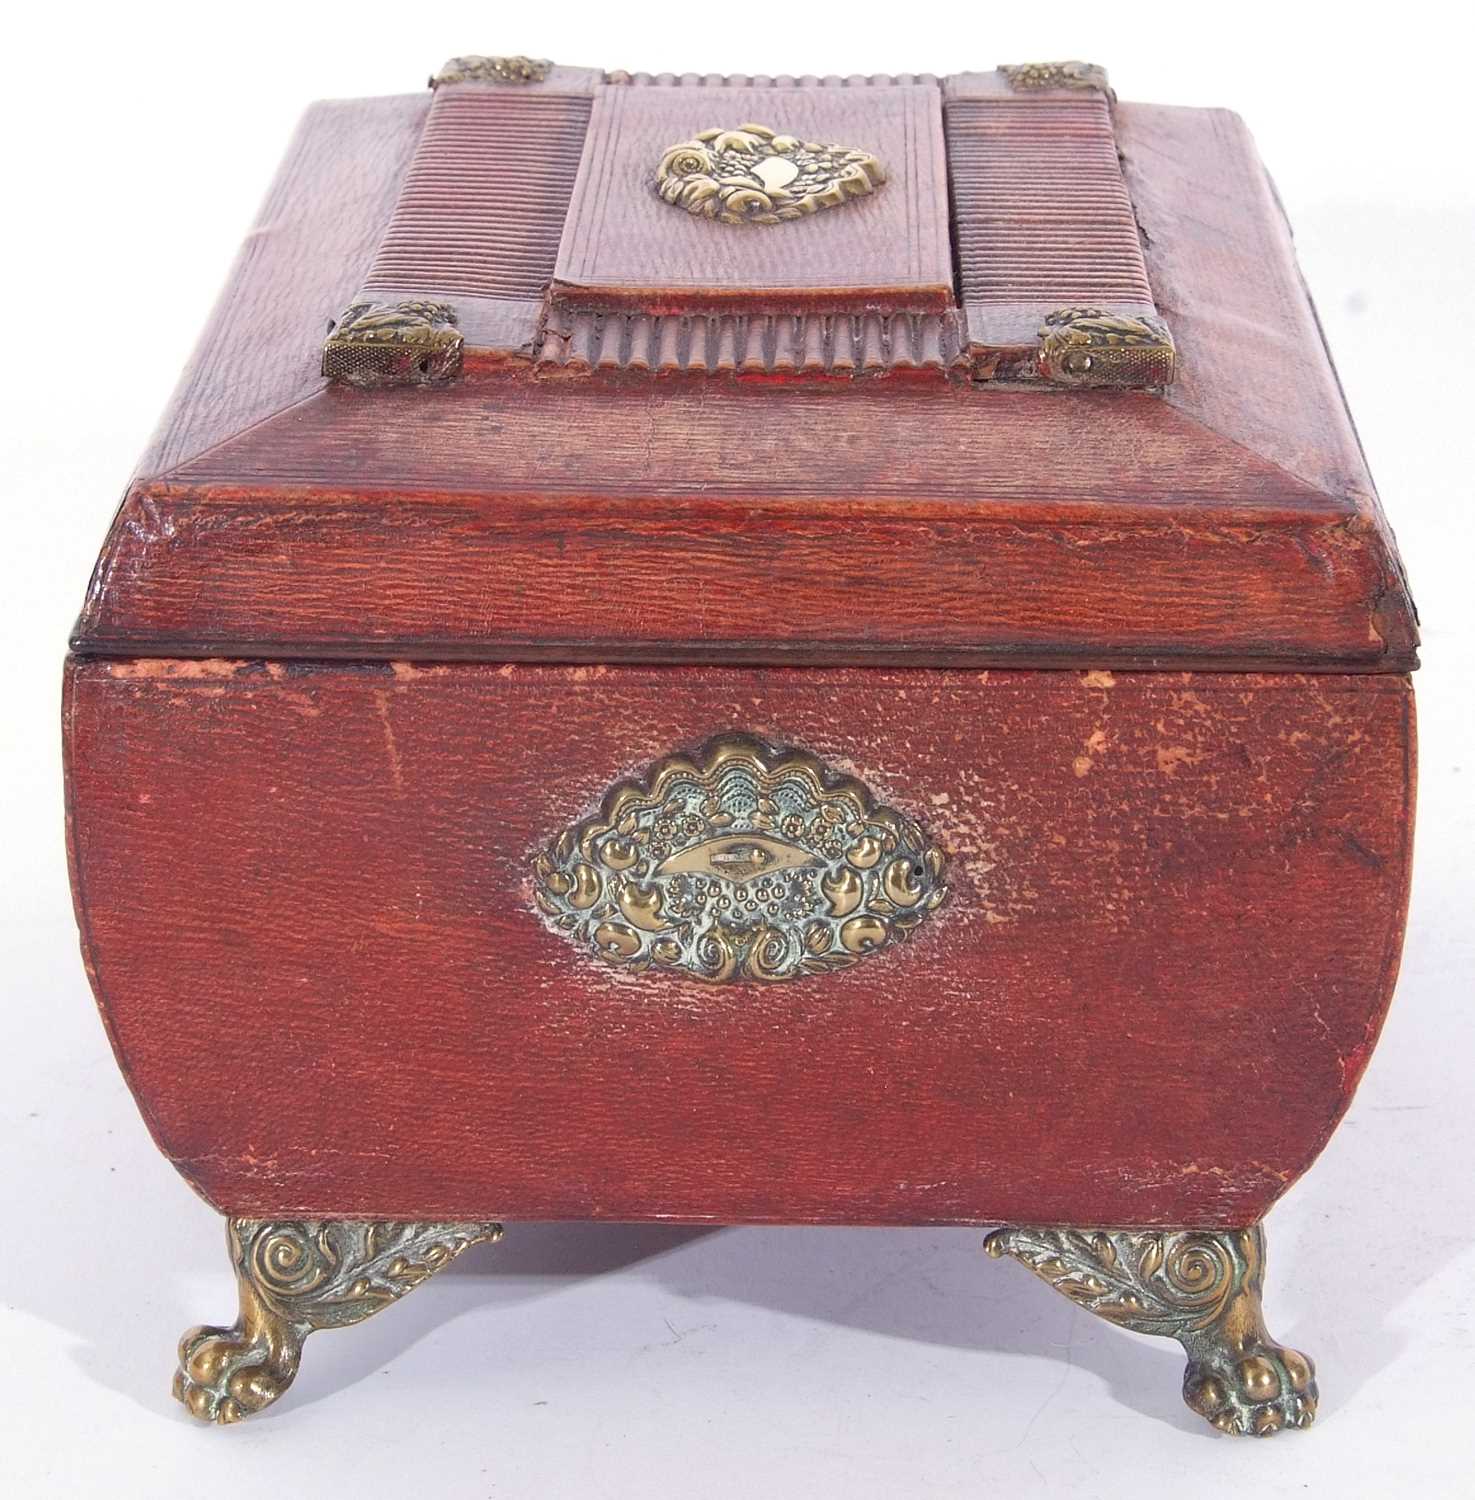 Regency red leather and brass embossed jewel box, hinged lid with silk lined interior, single drawer - Image 2 of 11